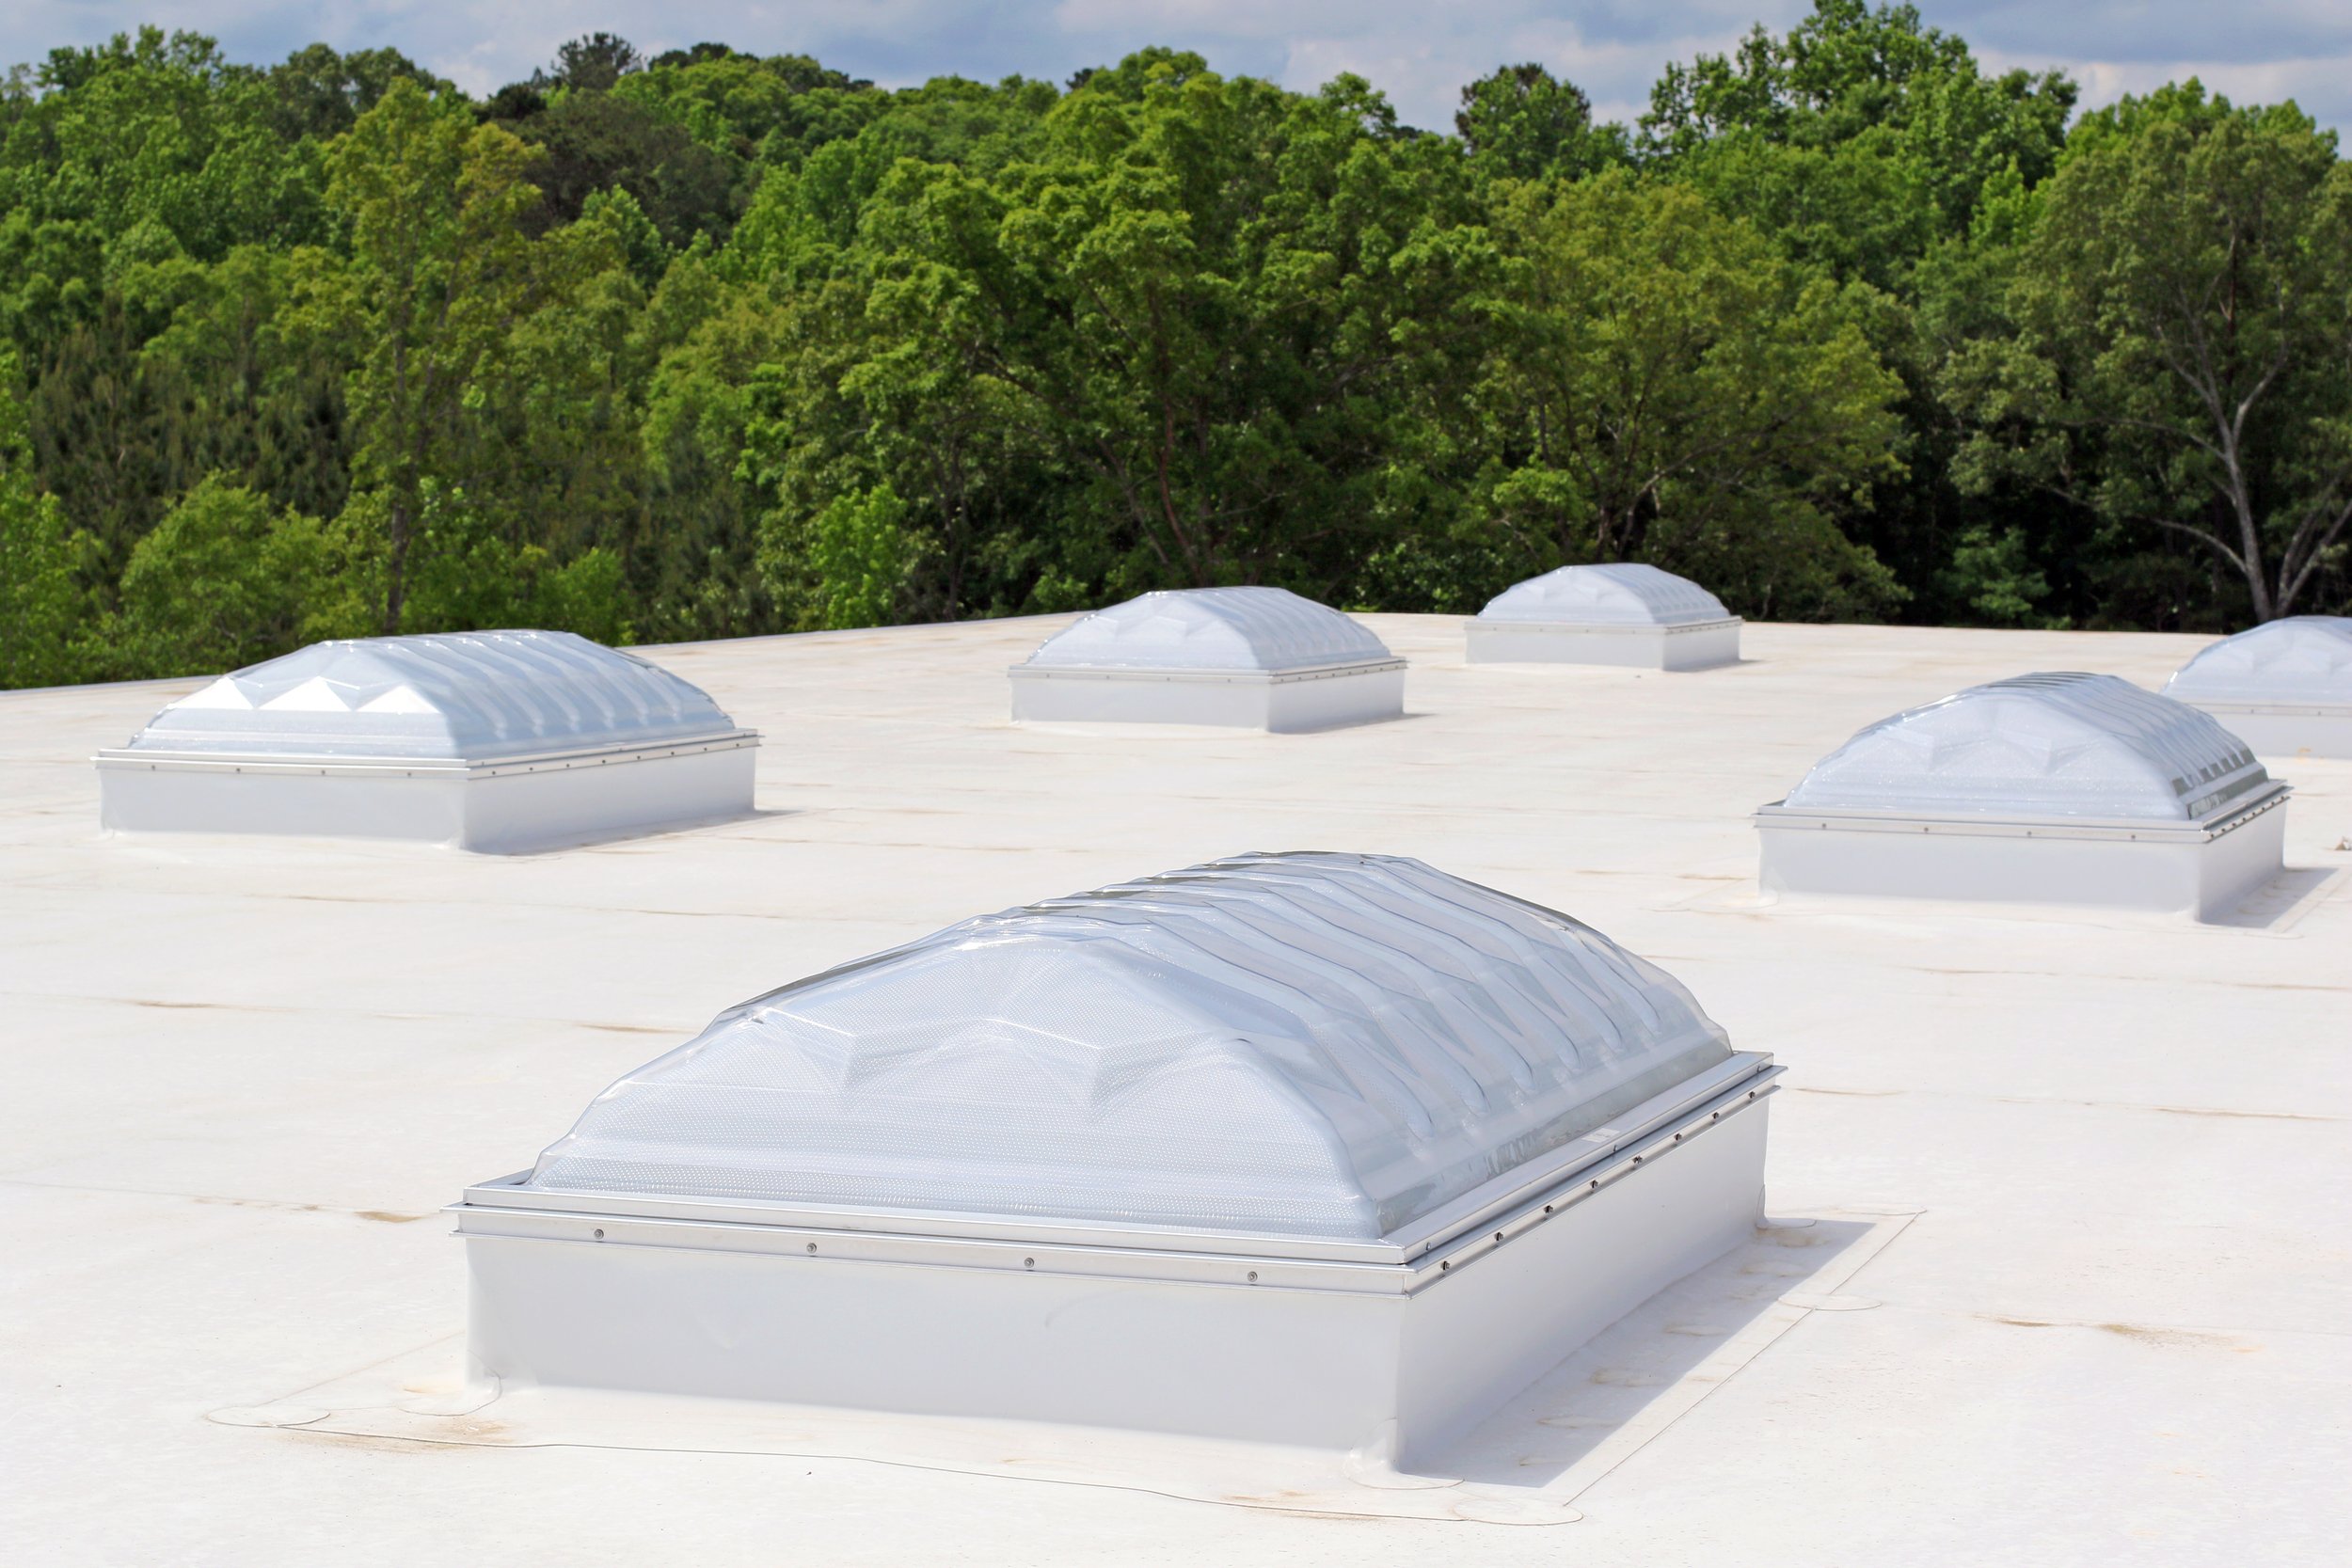 Application-clear-over-prismatic-3773-cd2-Dome-Unit-Skylights-Dynamic-Dome-0521.JPG